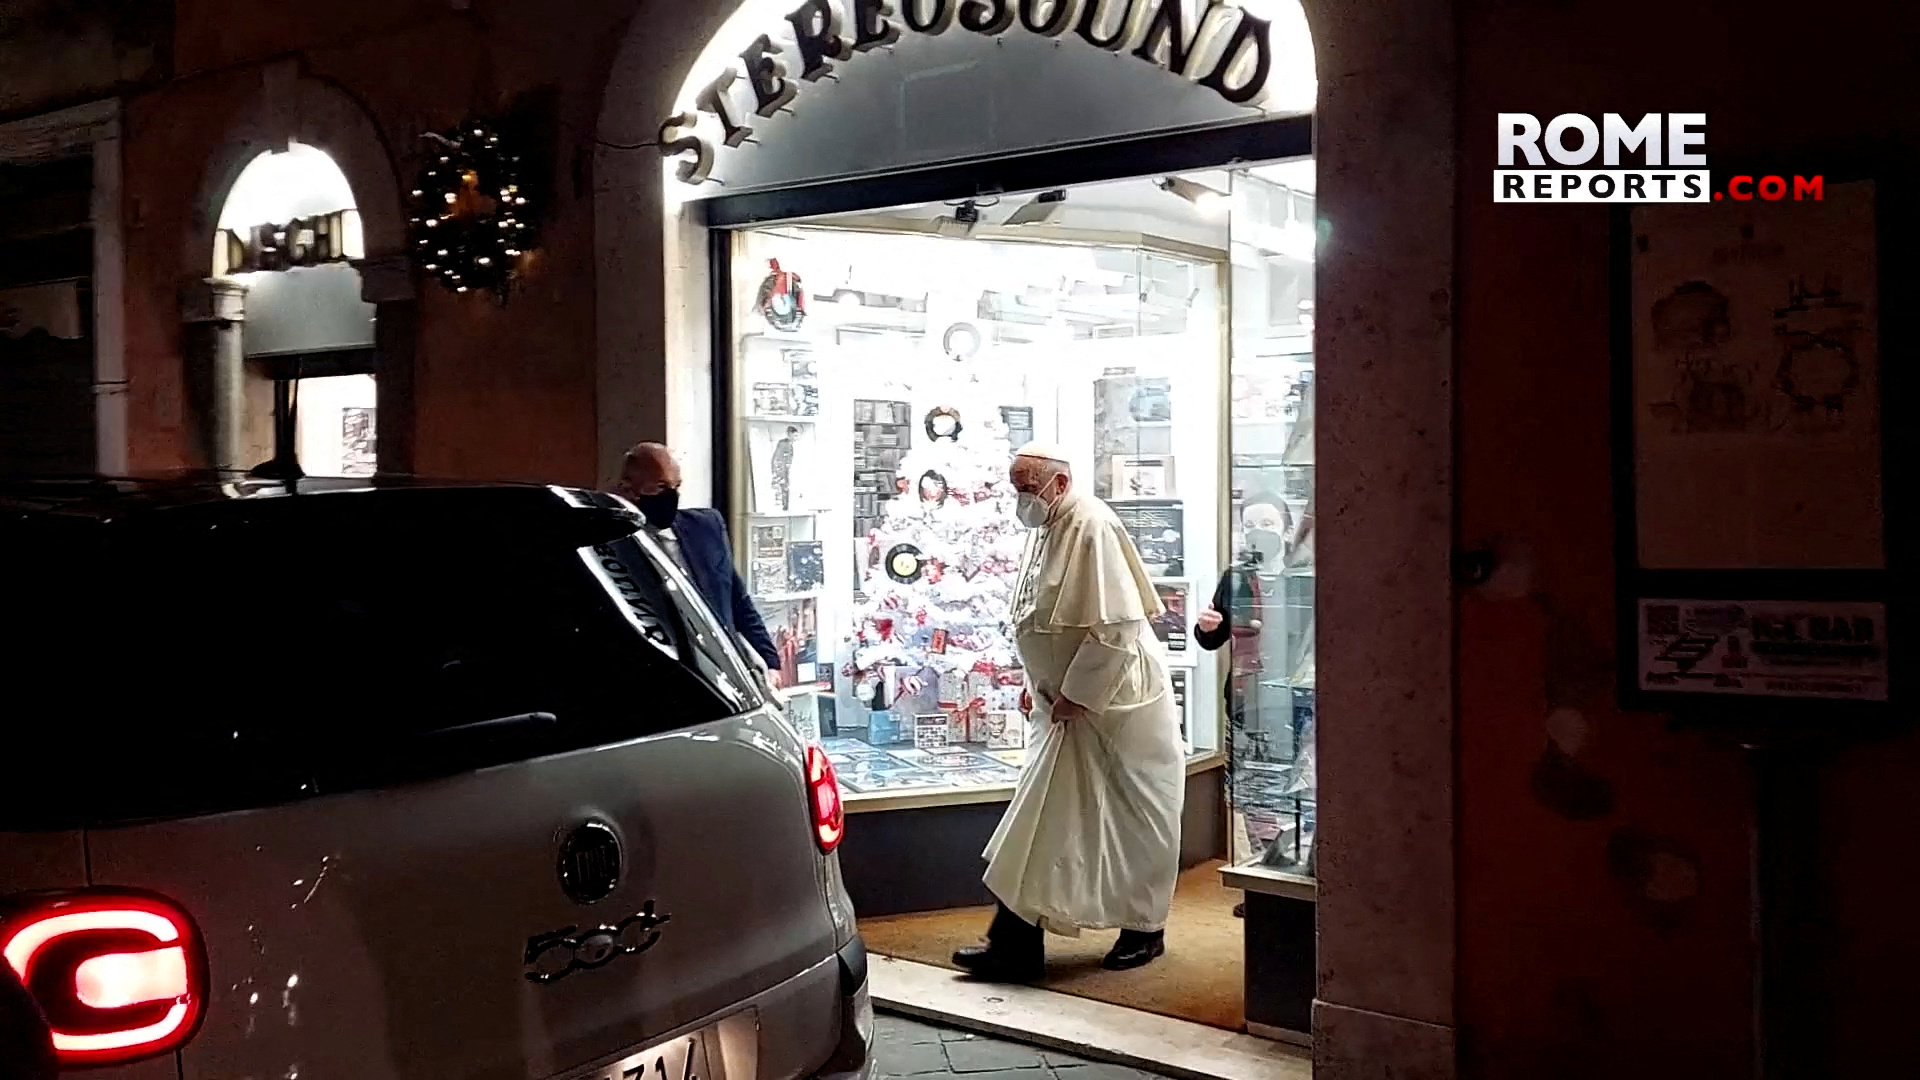 A screenshot taken from a video shows Pope Francis walking out of a record store in Rome, Italy, on January 11, 2022. The video was taken on January 11, 2022. Rome reports / delivery via REUTERS 